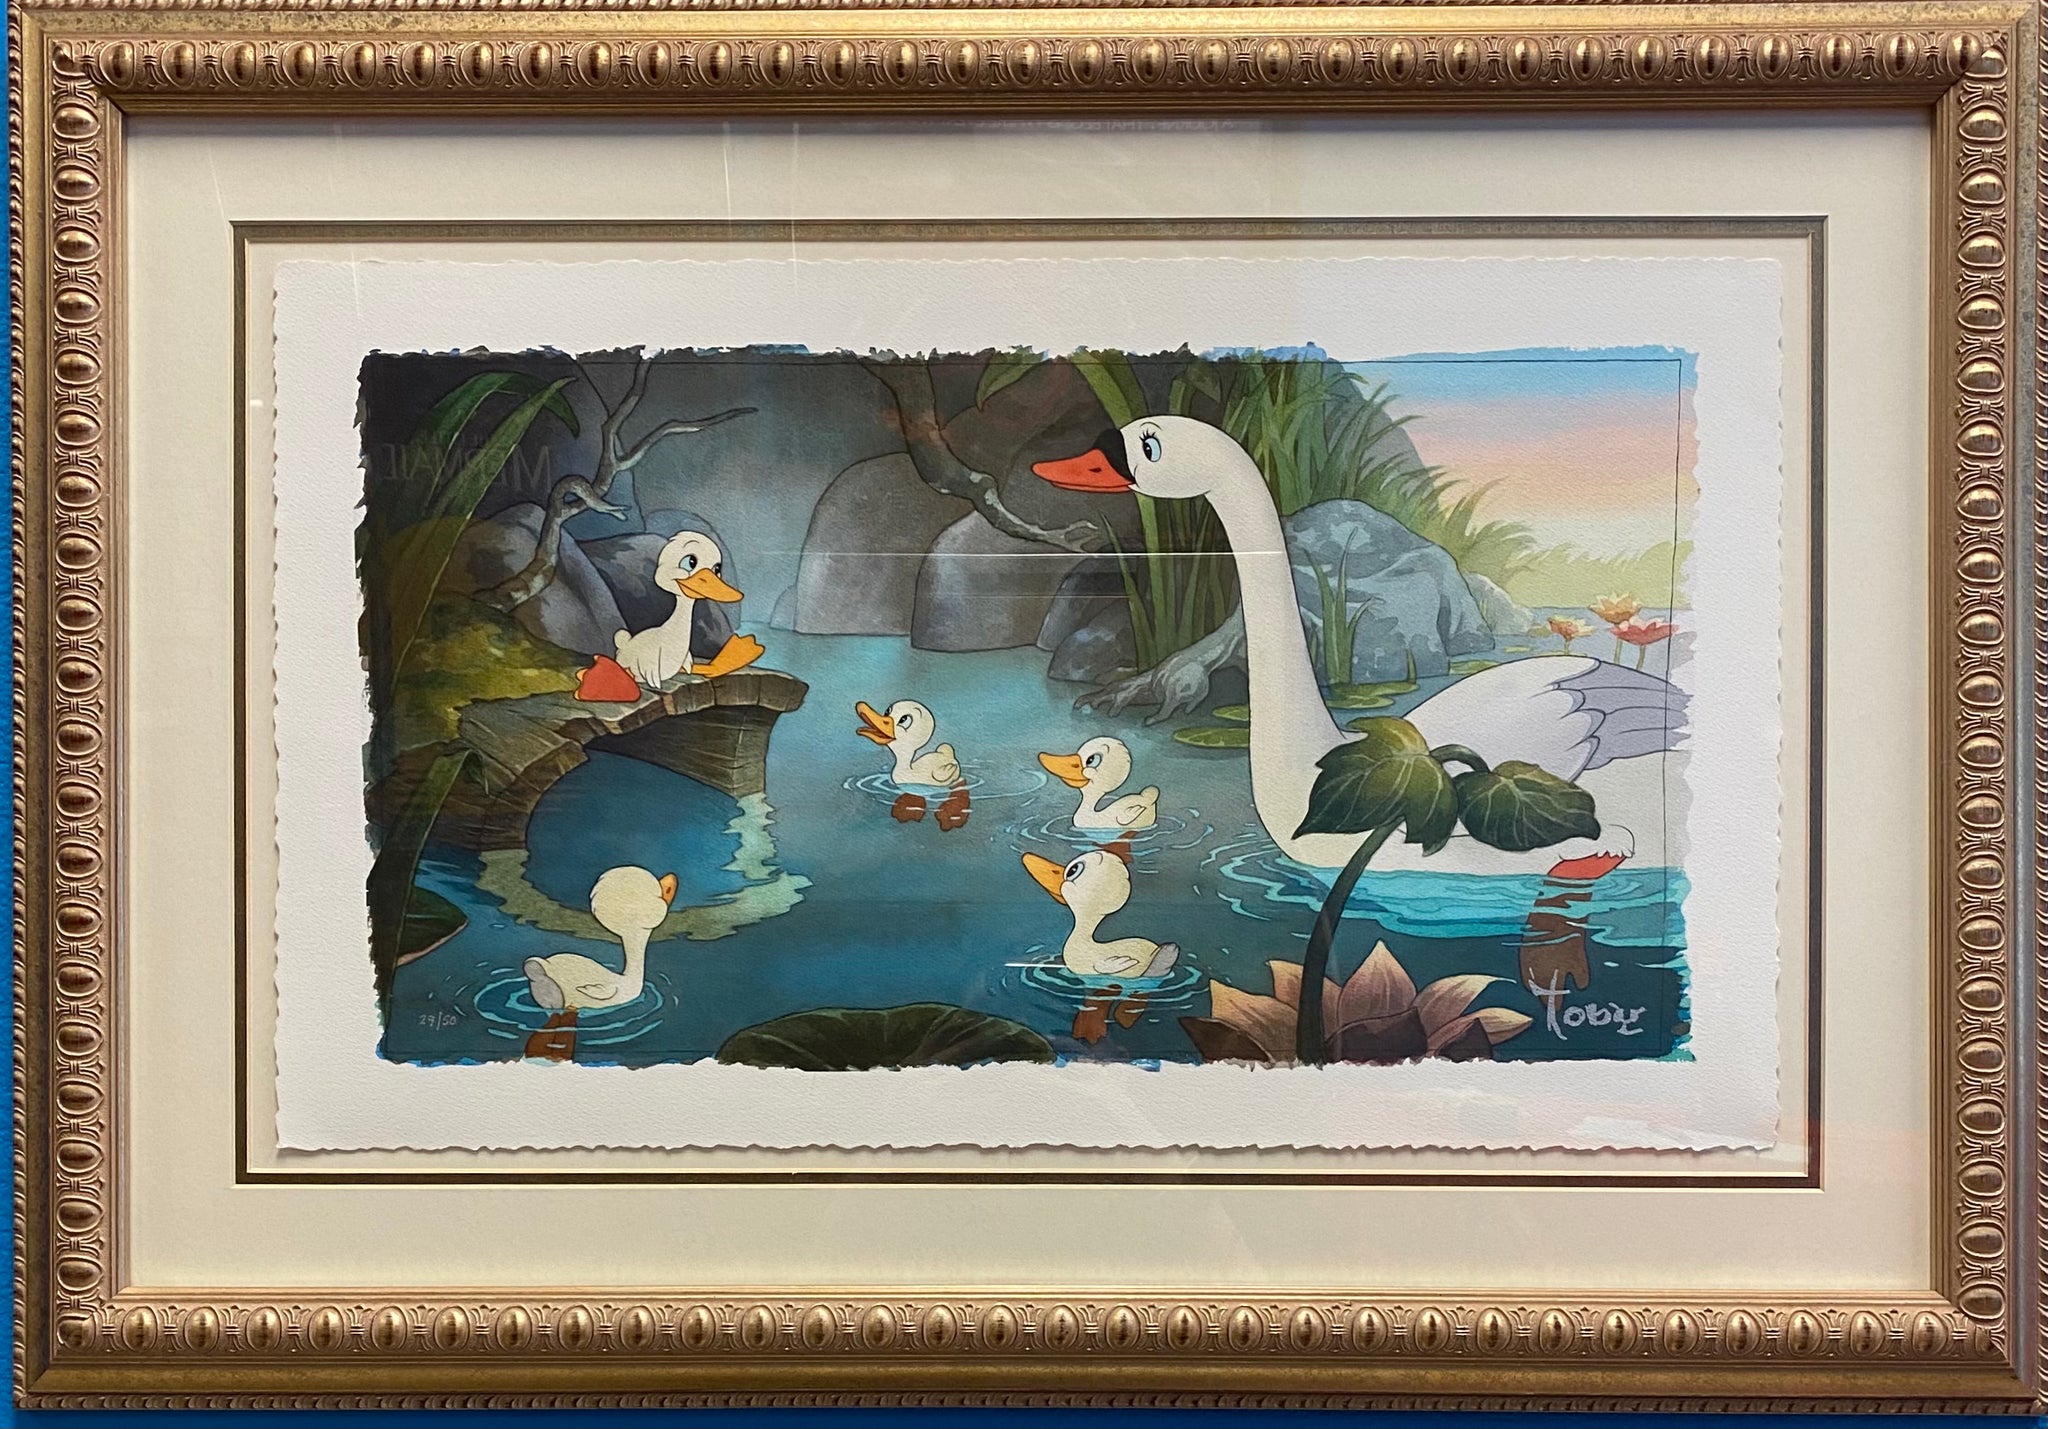 Ugly Duckling Framed by Toby Bluth